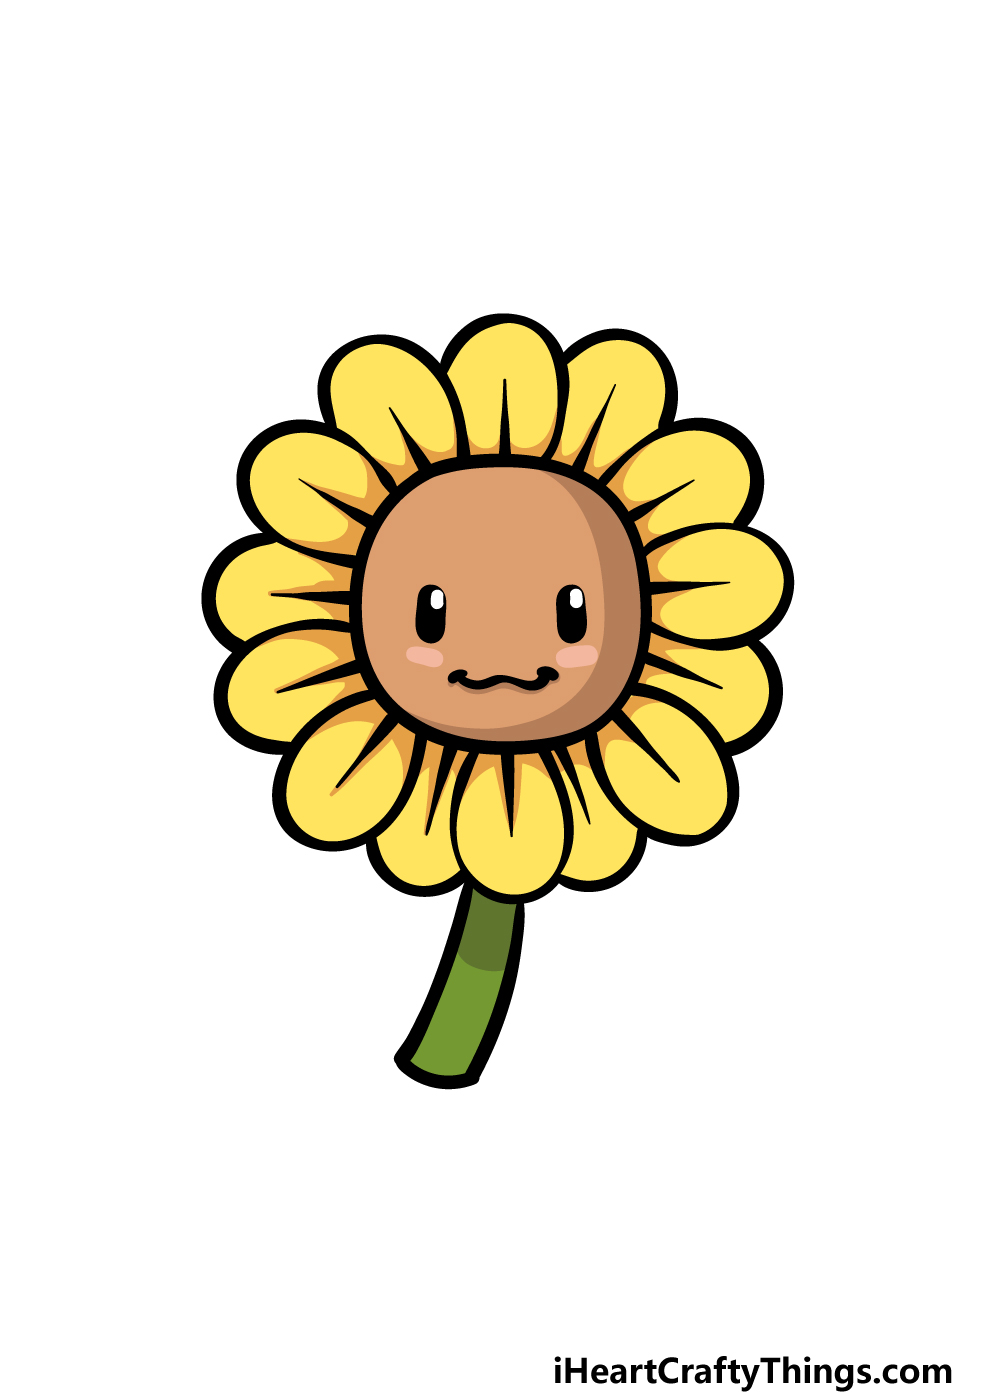 Cartoon Sunflower Drawing - How To Draw A Cartoon Sunflower Step By Step!